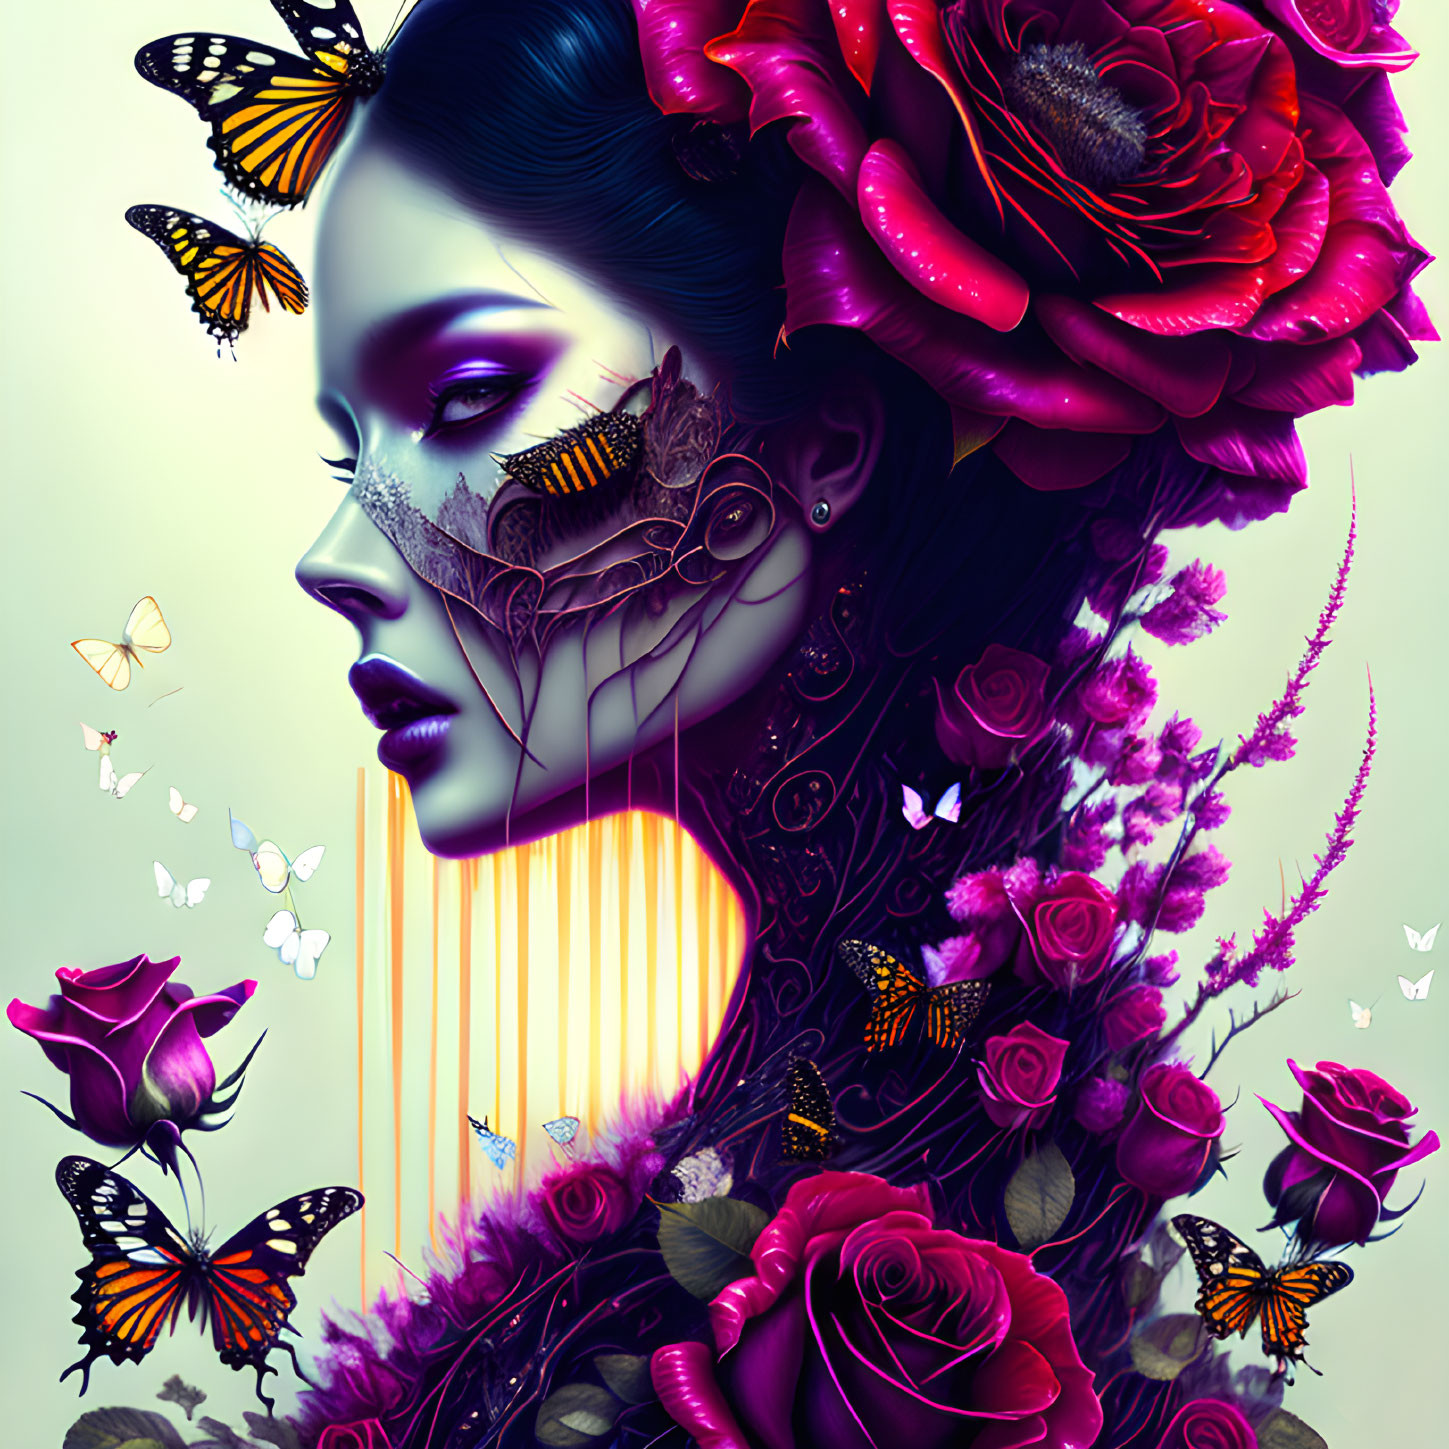 Digital artwork featuring woman with floral and butterfly motif